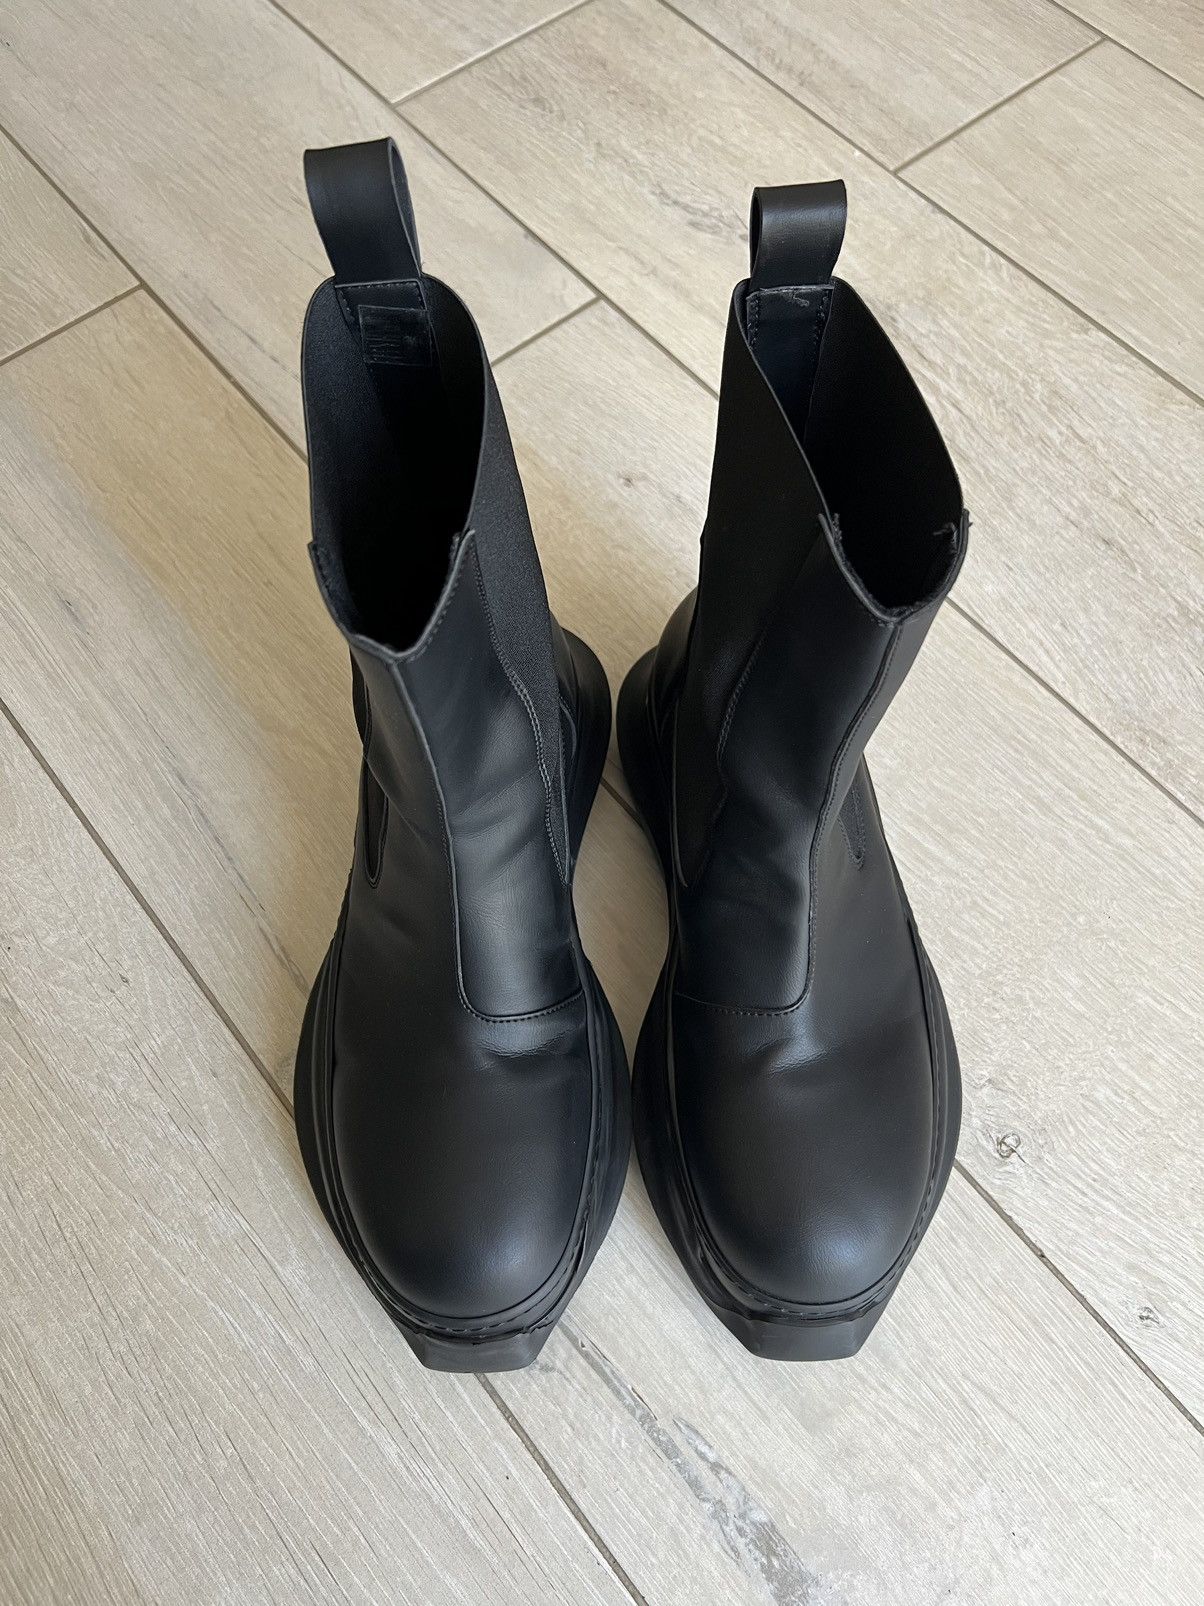 Rick Owens RICK OWENS “Abstract Beatle Boots”   🏻 | Grailed